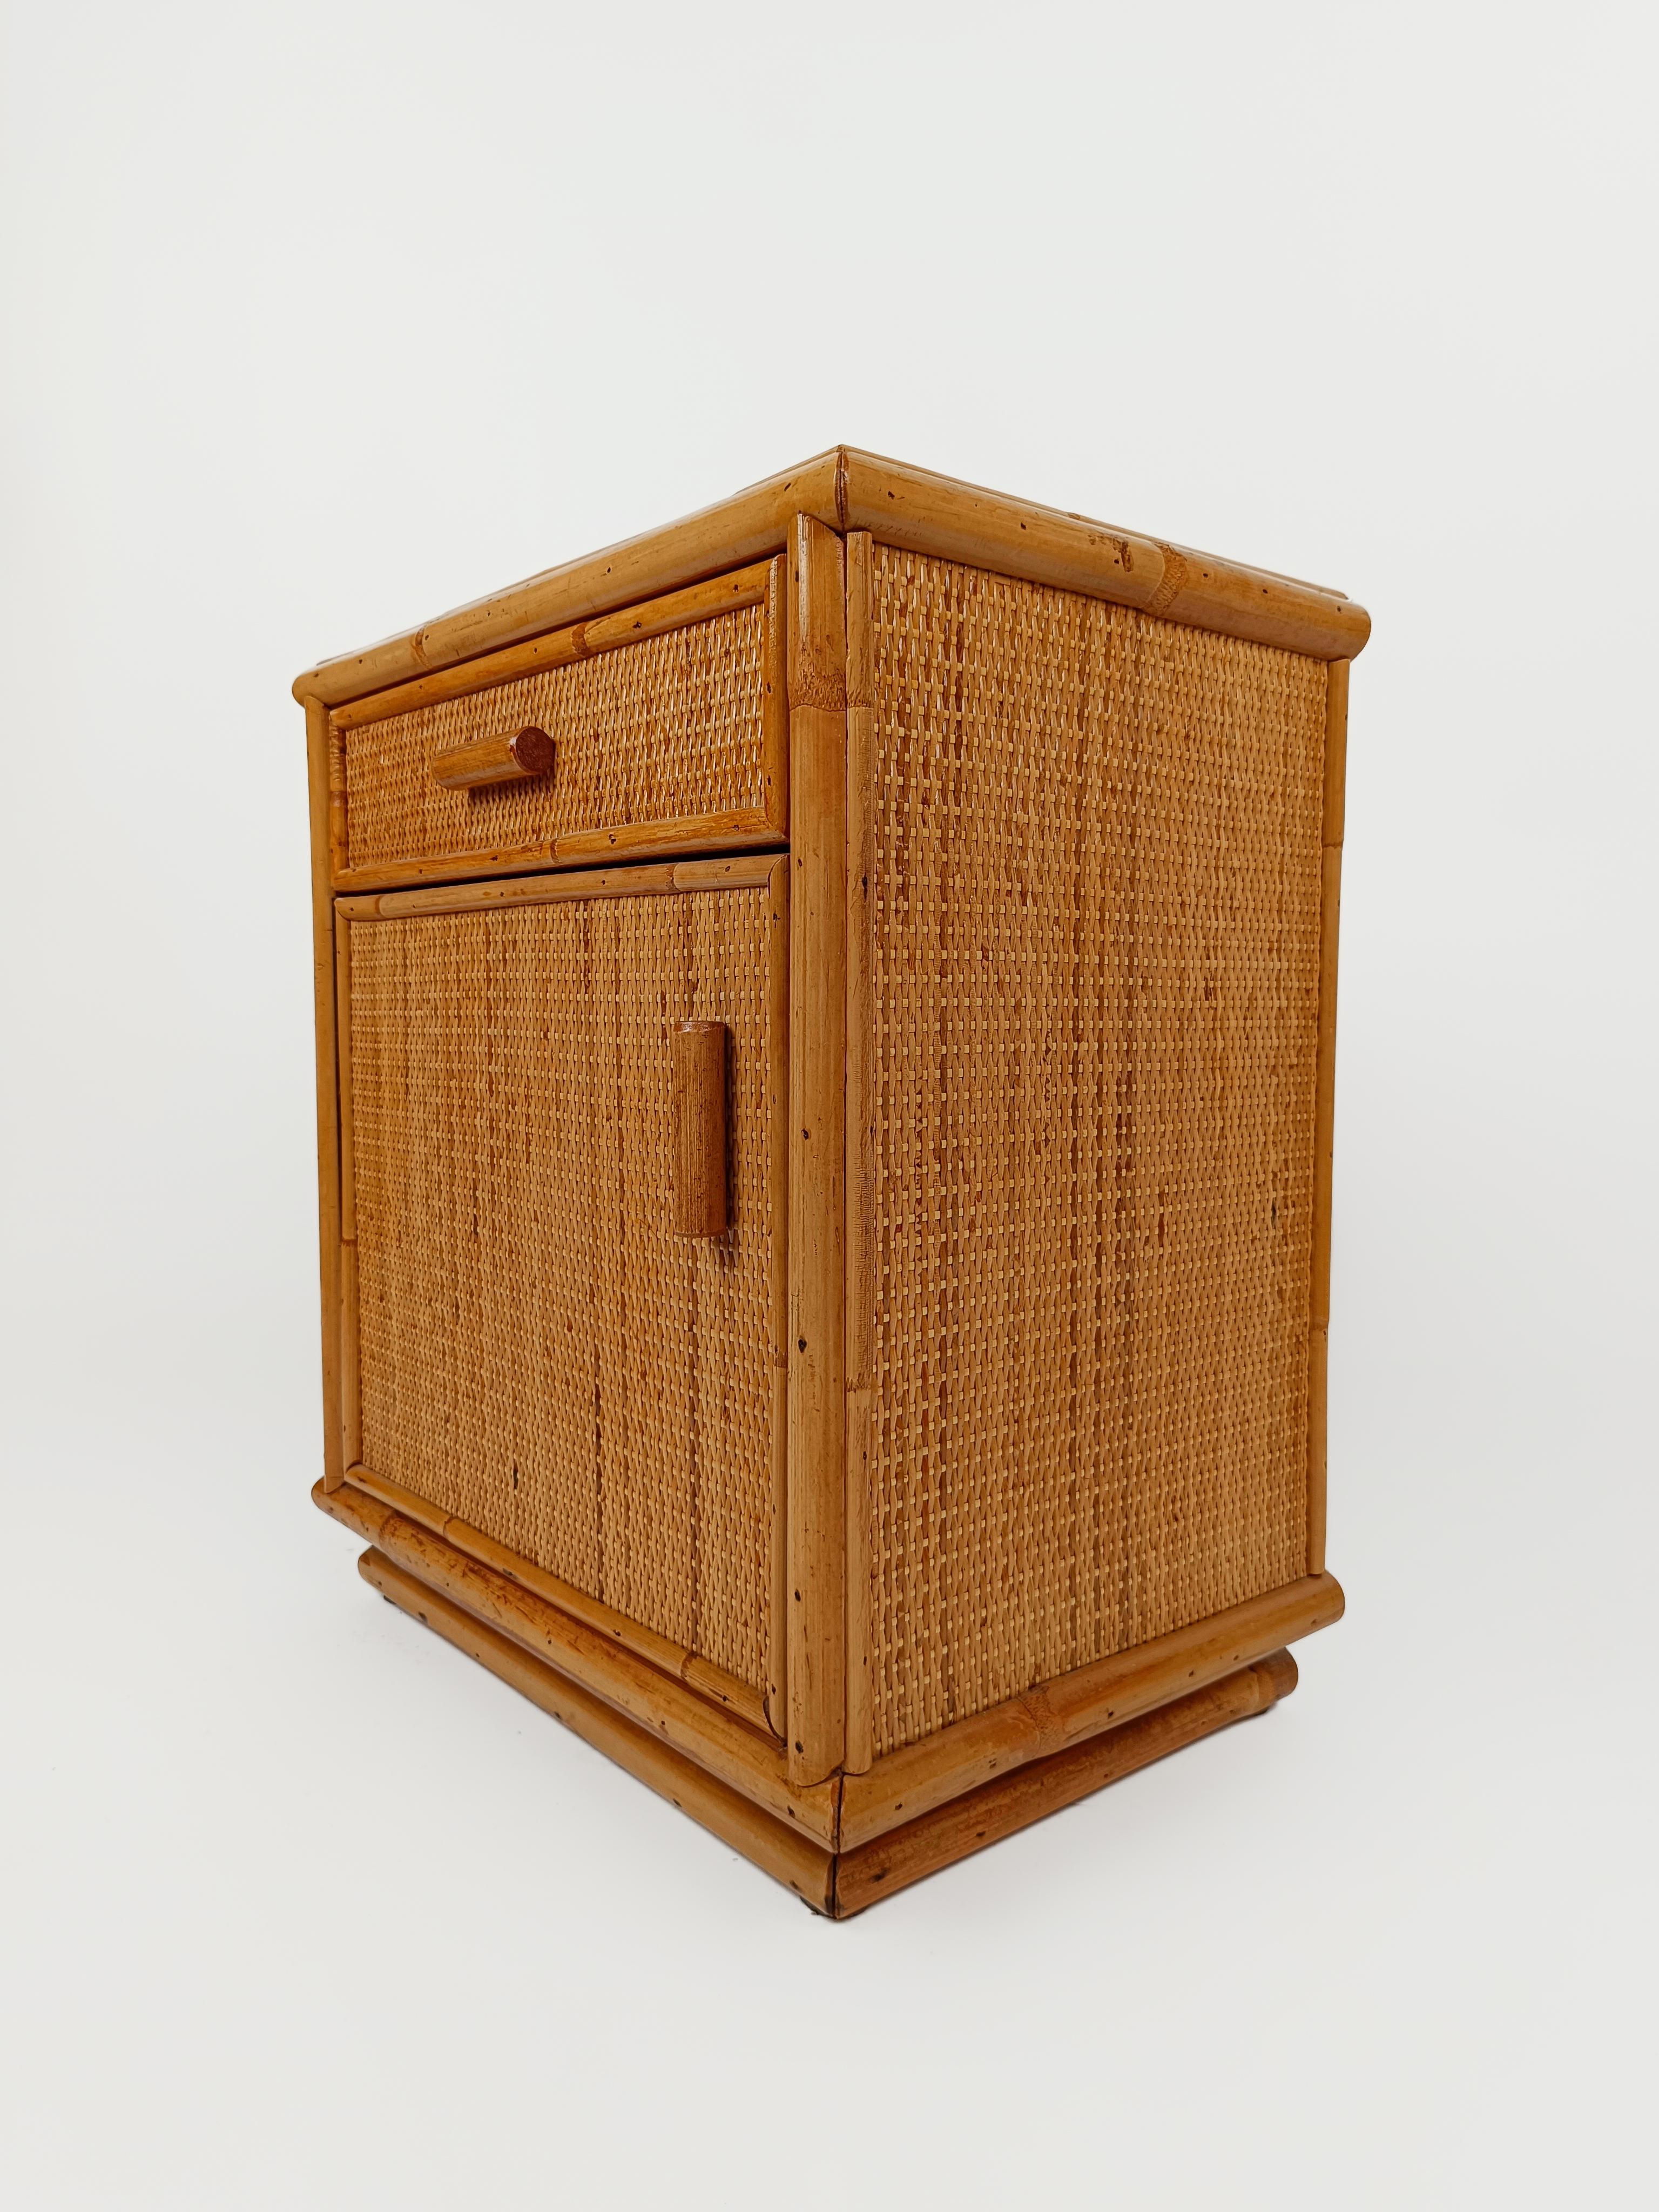 a pair of vintage bedside tables dating back to the 60s and 70s and certainly made in Italy.
The structure of these Mid Century Modern Night stands is in beech wood and plywood, stable and solid, they are entirely covered with a thick wicker